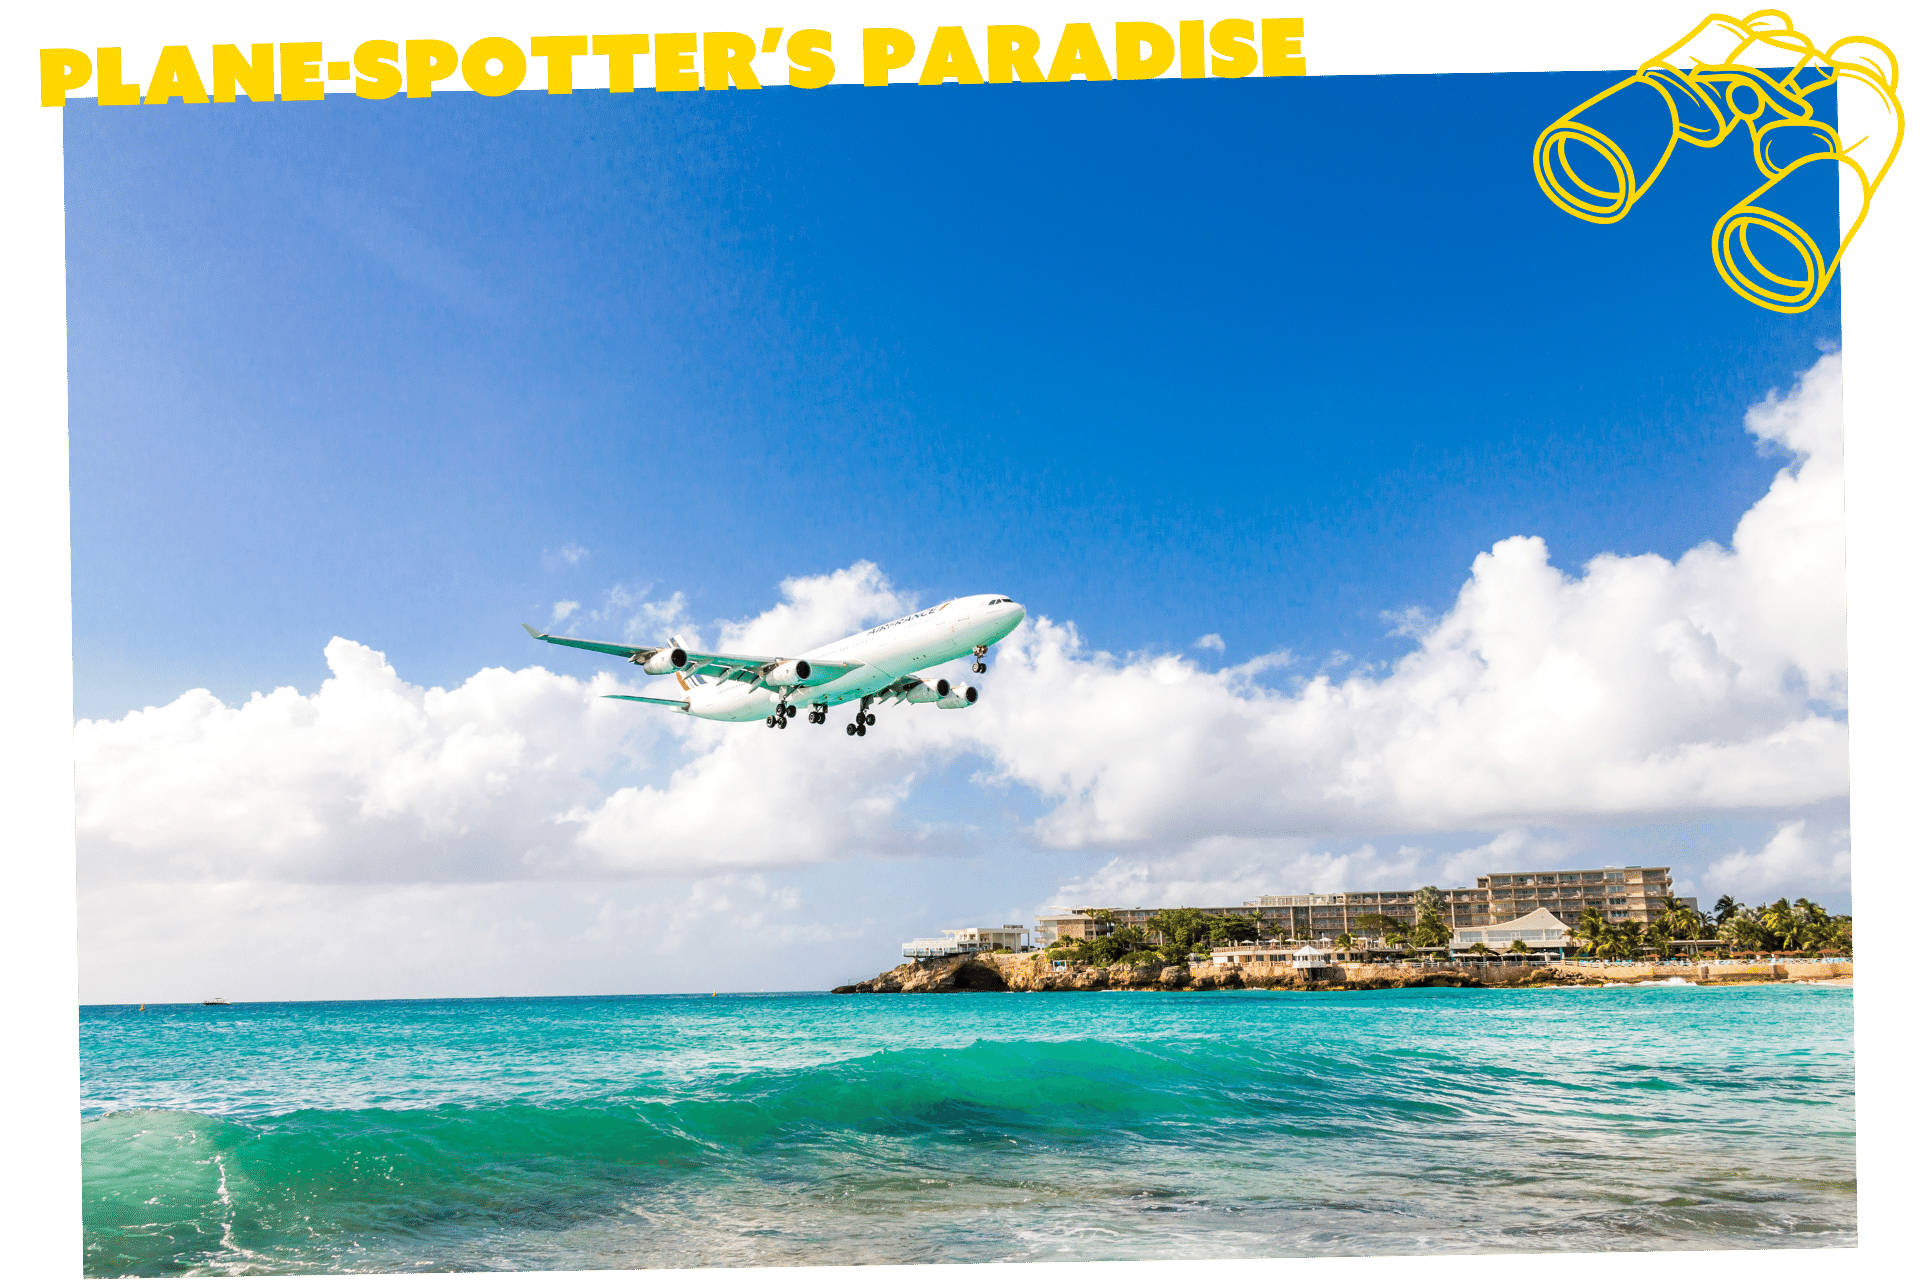 The planes that pass over Maho Beach makes it one of the word's most unique beaches.